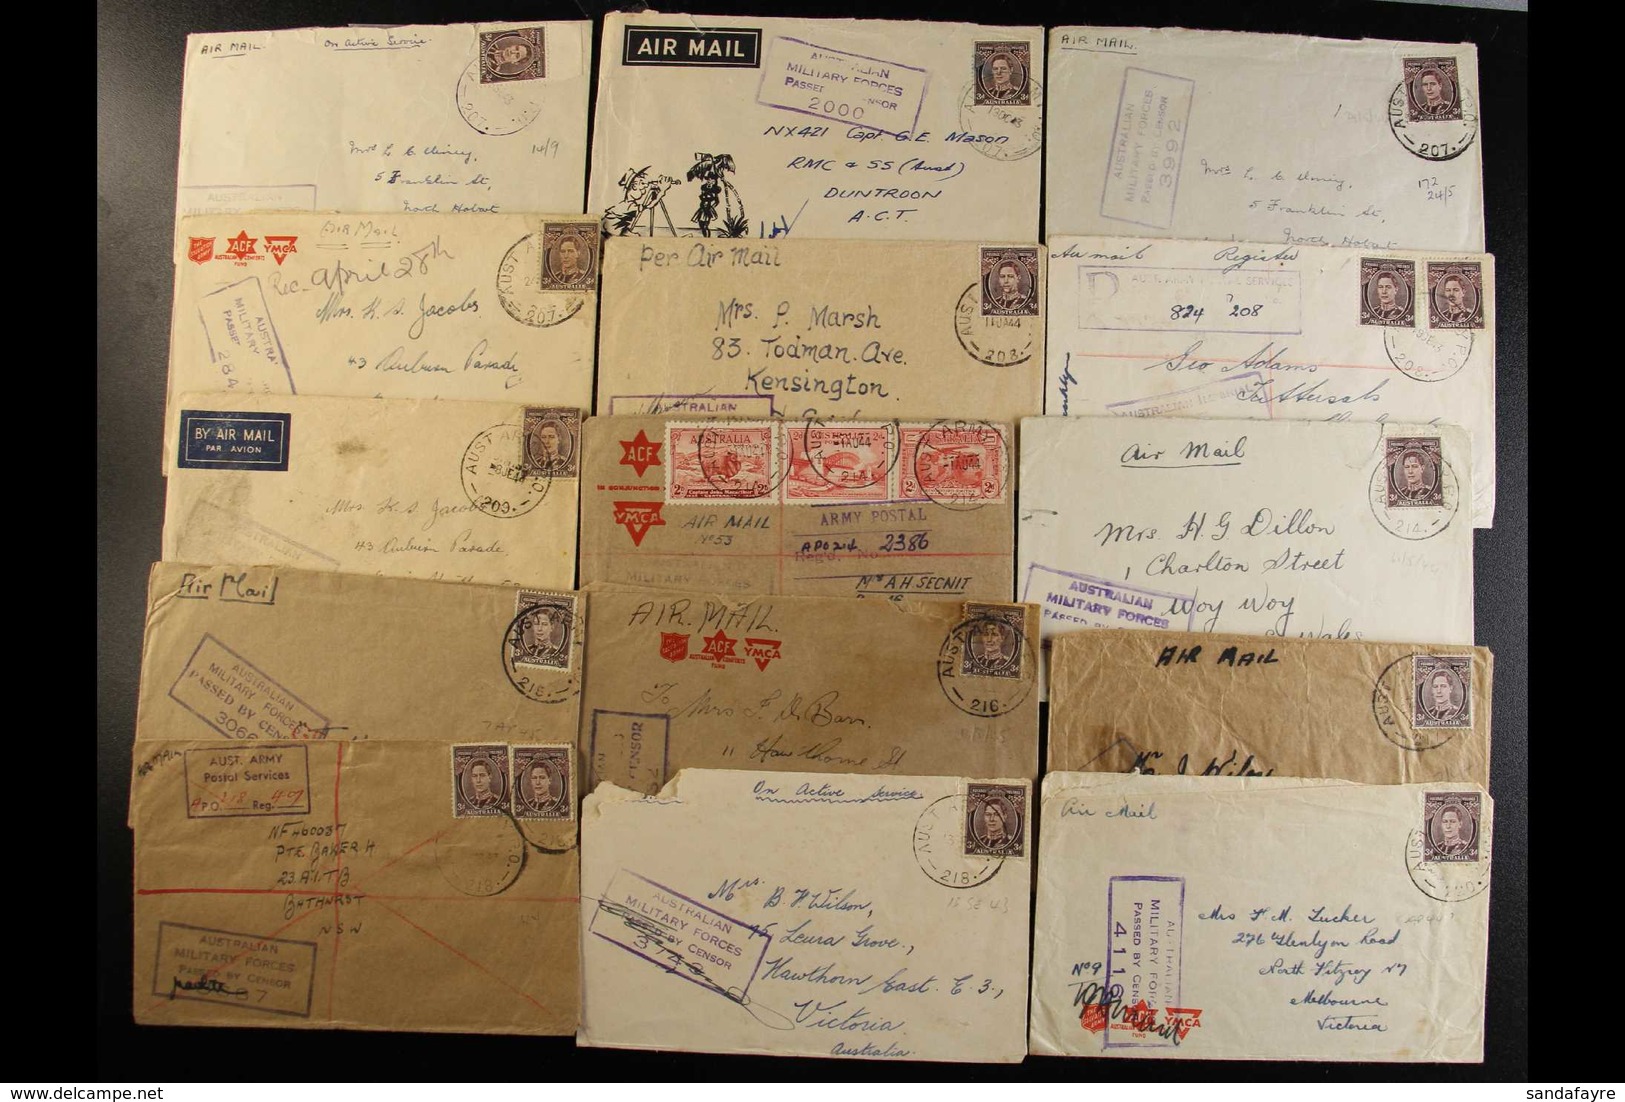 WW2 AUSTRALIAN FORCES - AUST ARMY DATESTAMPS A Fine Collection Of Covers Back To Australia, Bearing Australian KGVI Stam - Papua-Neuguinea